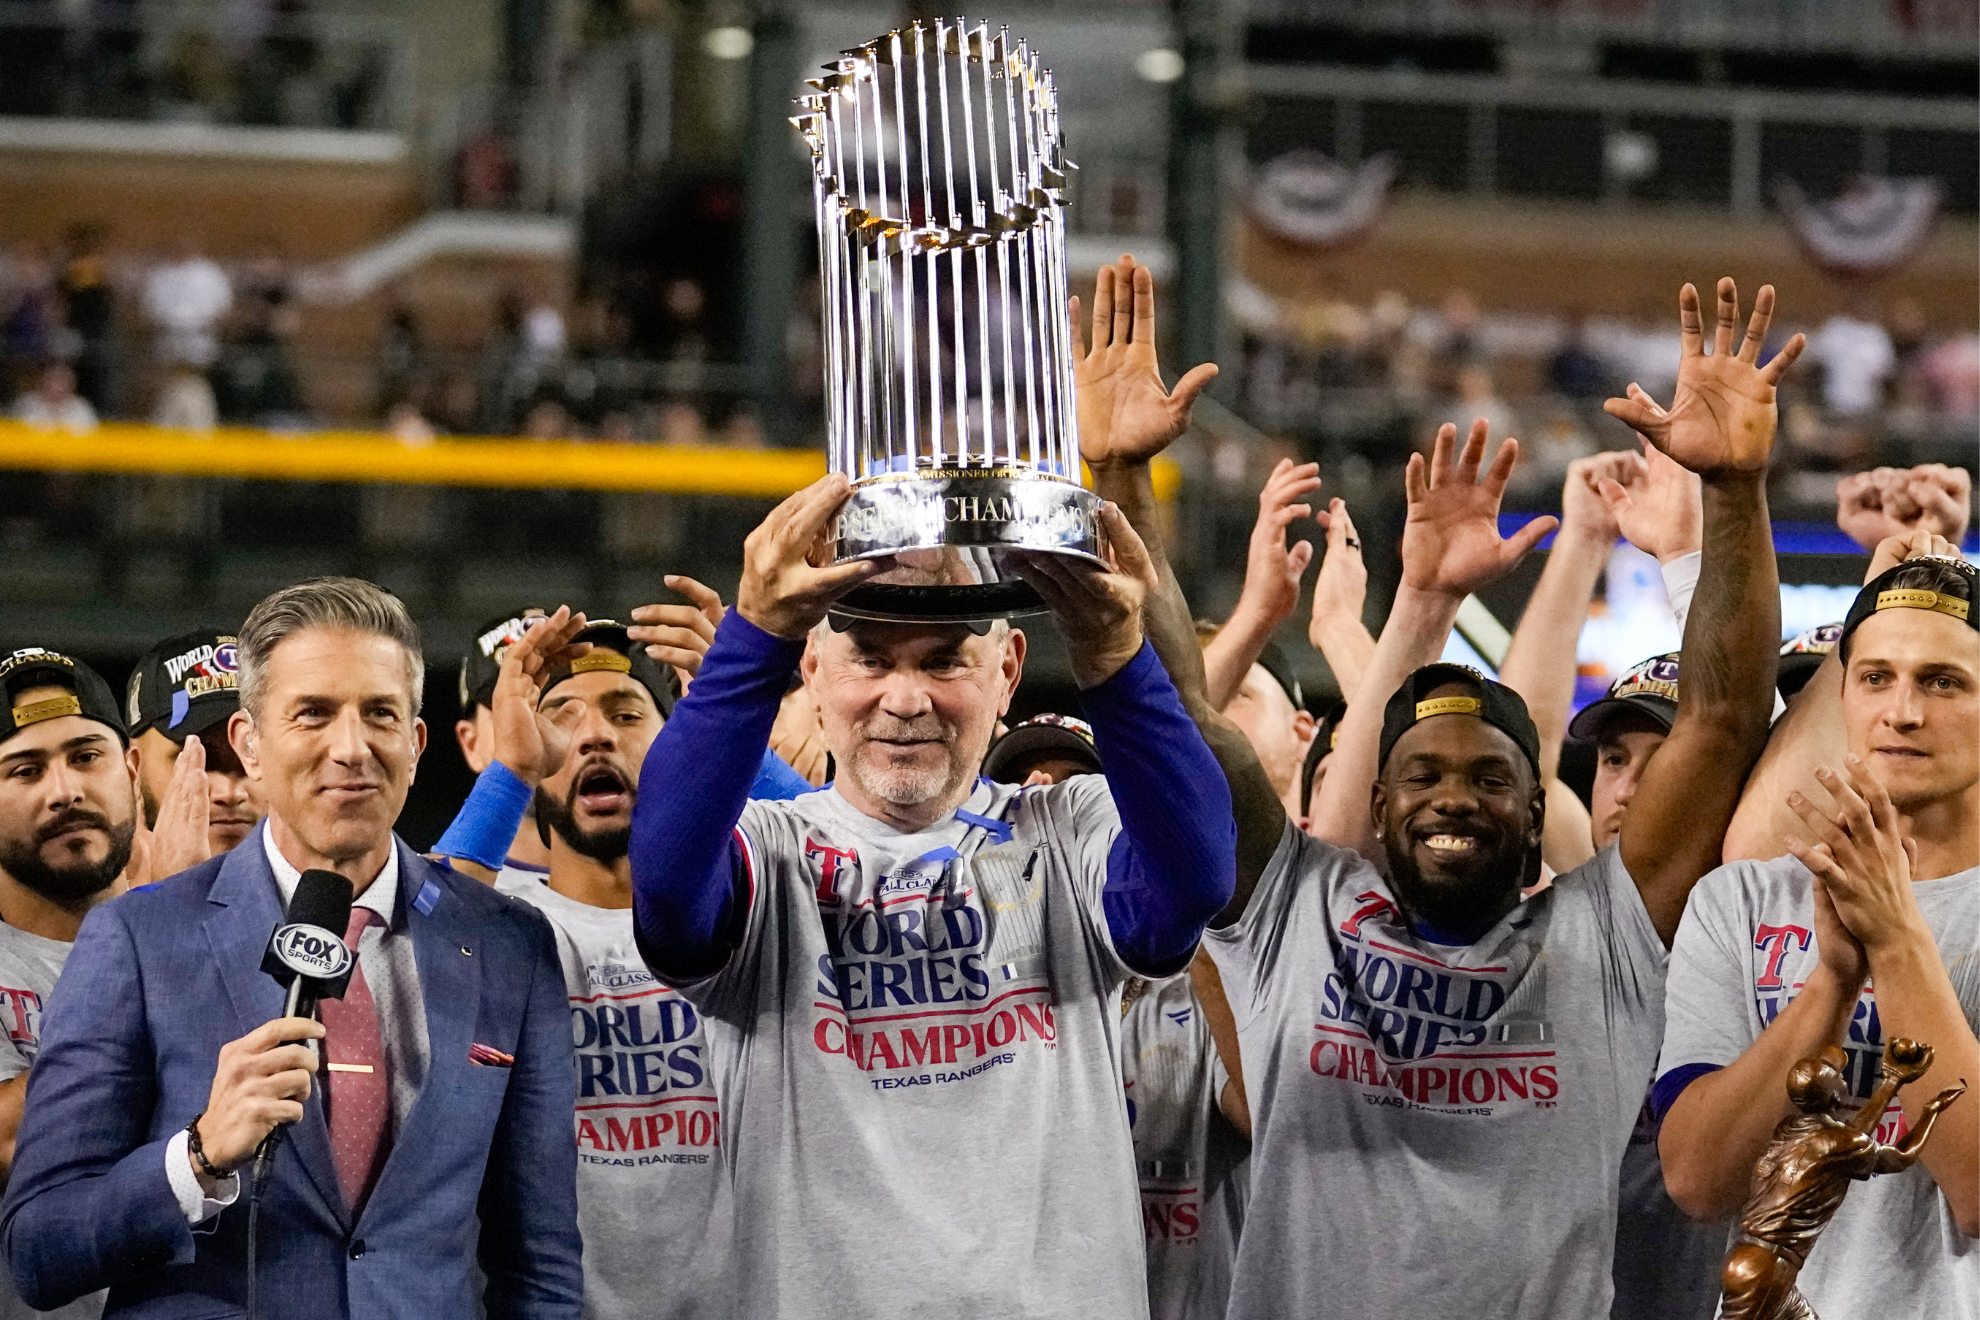 The Rangers Bruce Bochy lifts the Commissoners Trophy. This is the fourth time he has won the World Series as a manager.